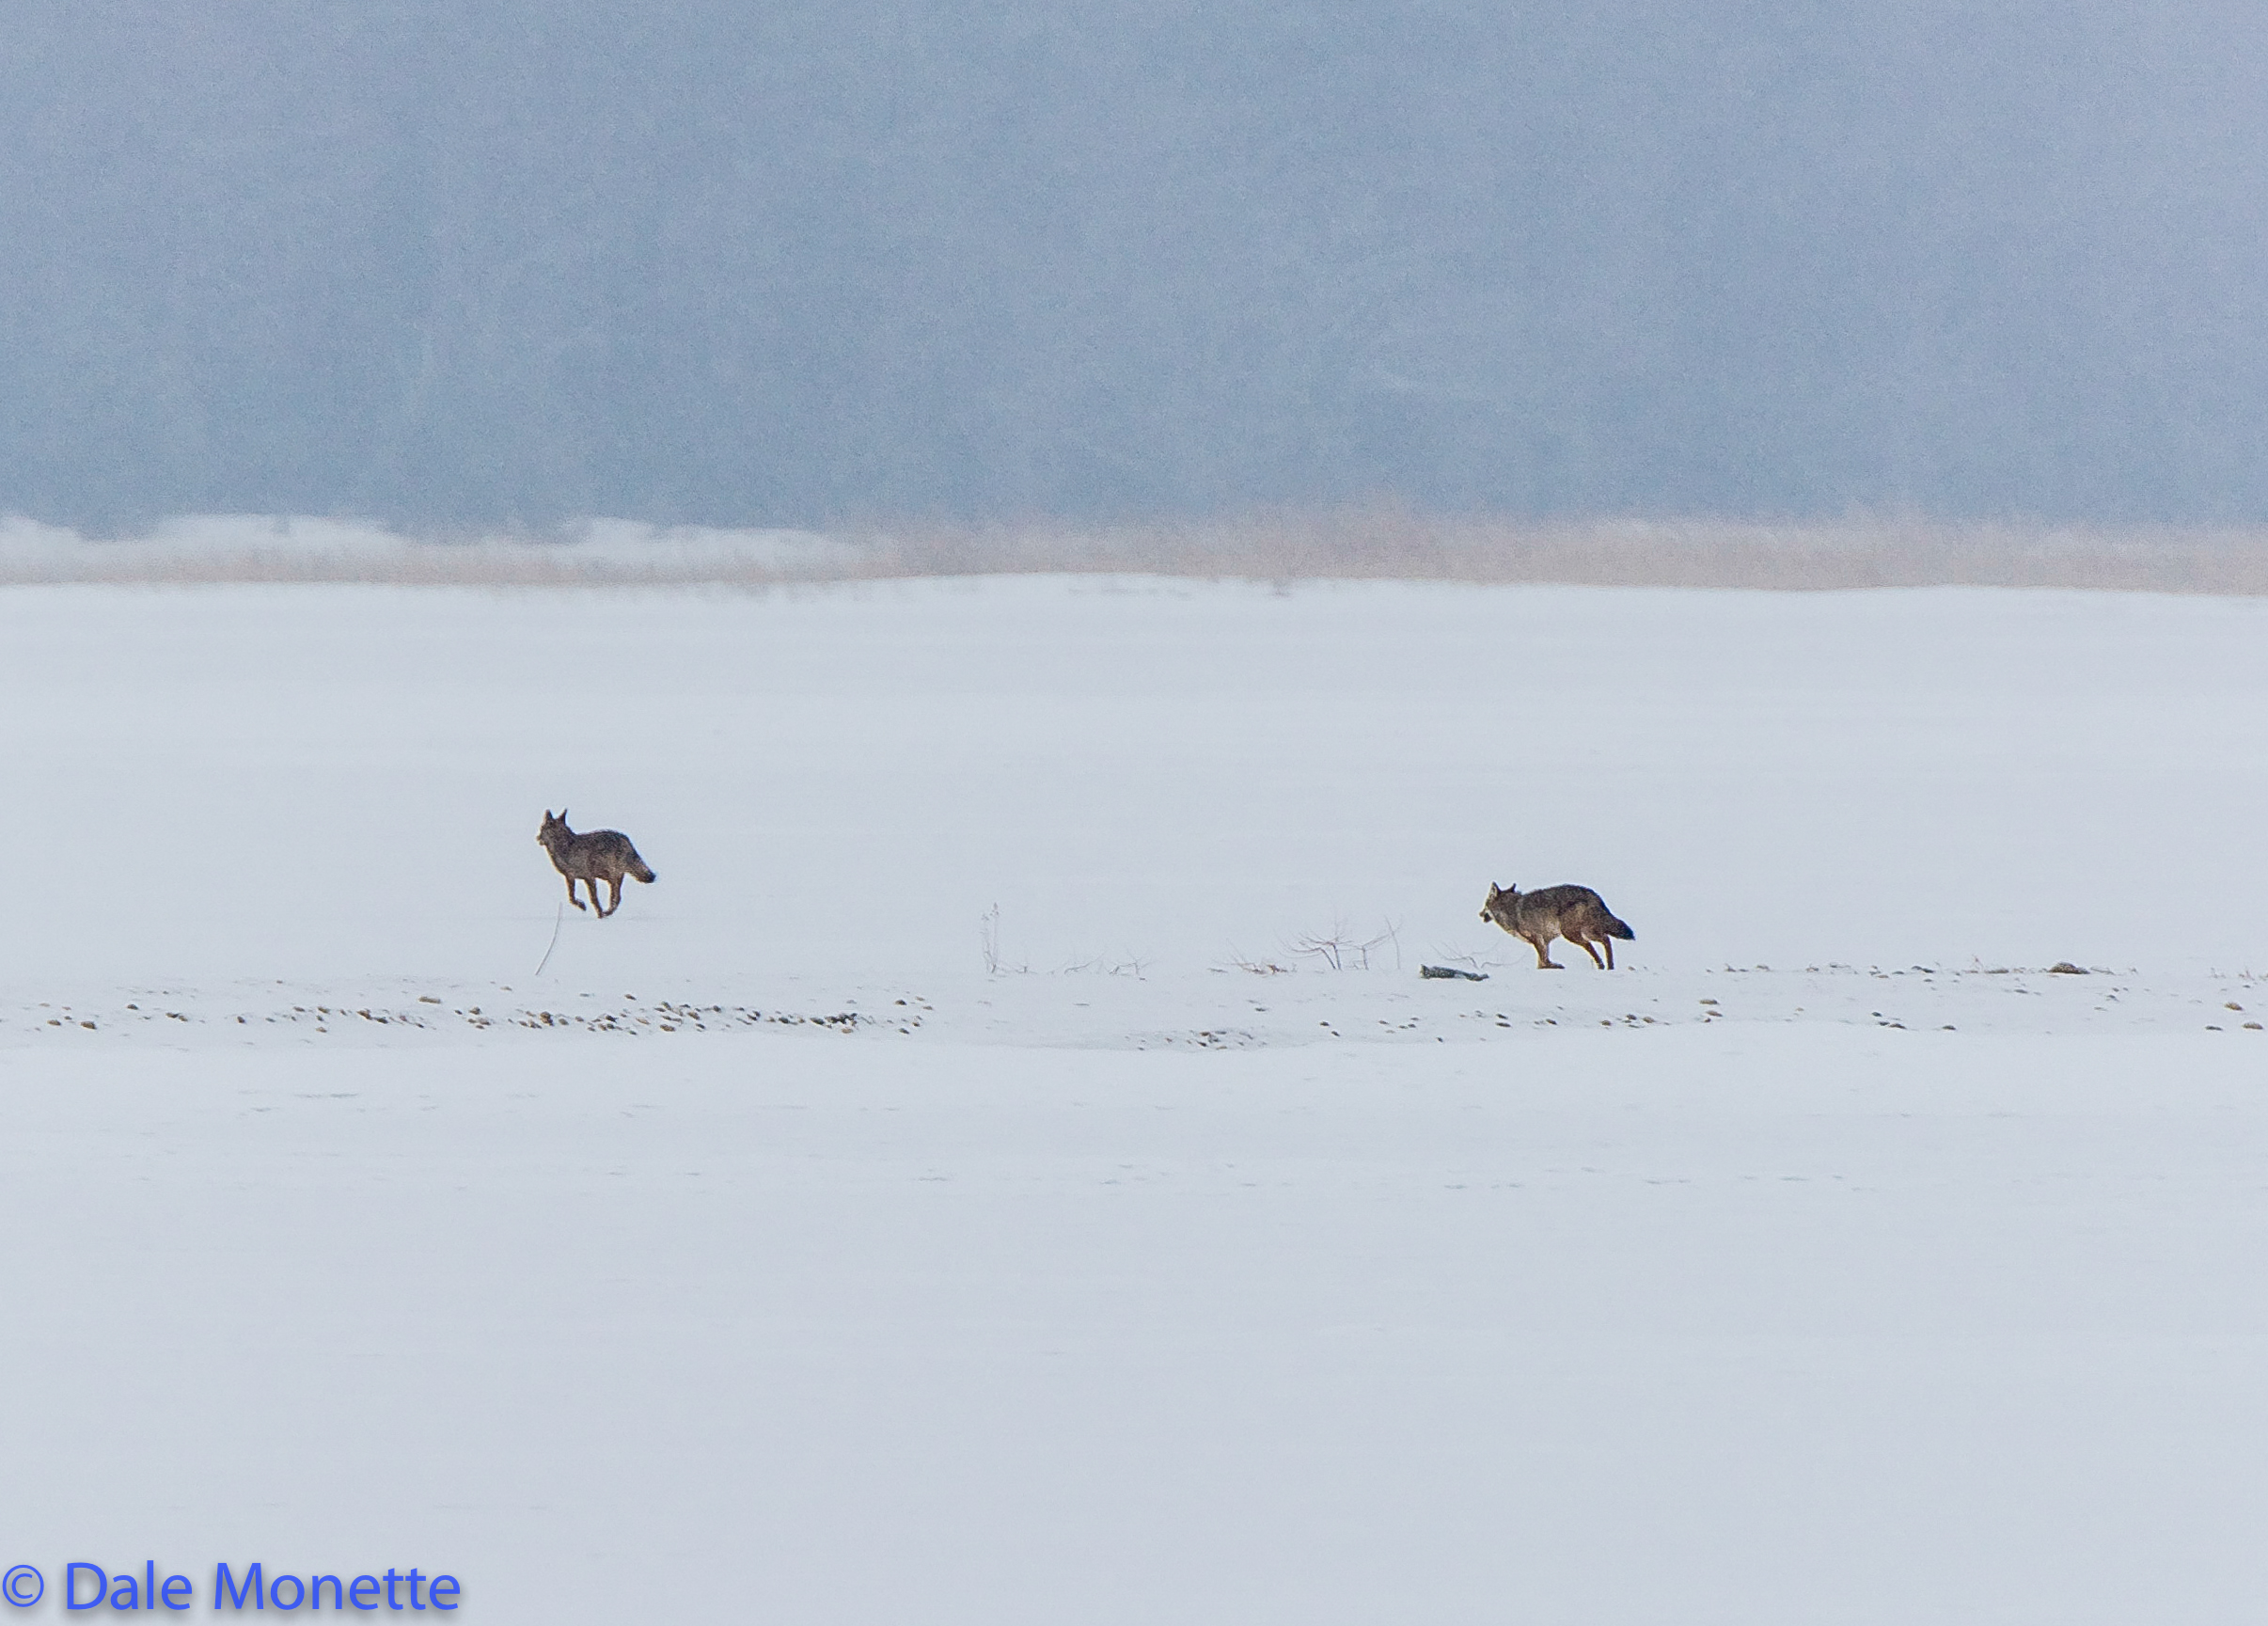   A pair of coyotes take off running through a snow storm across the ice at Quabbin.  